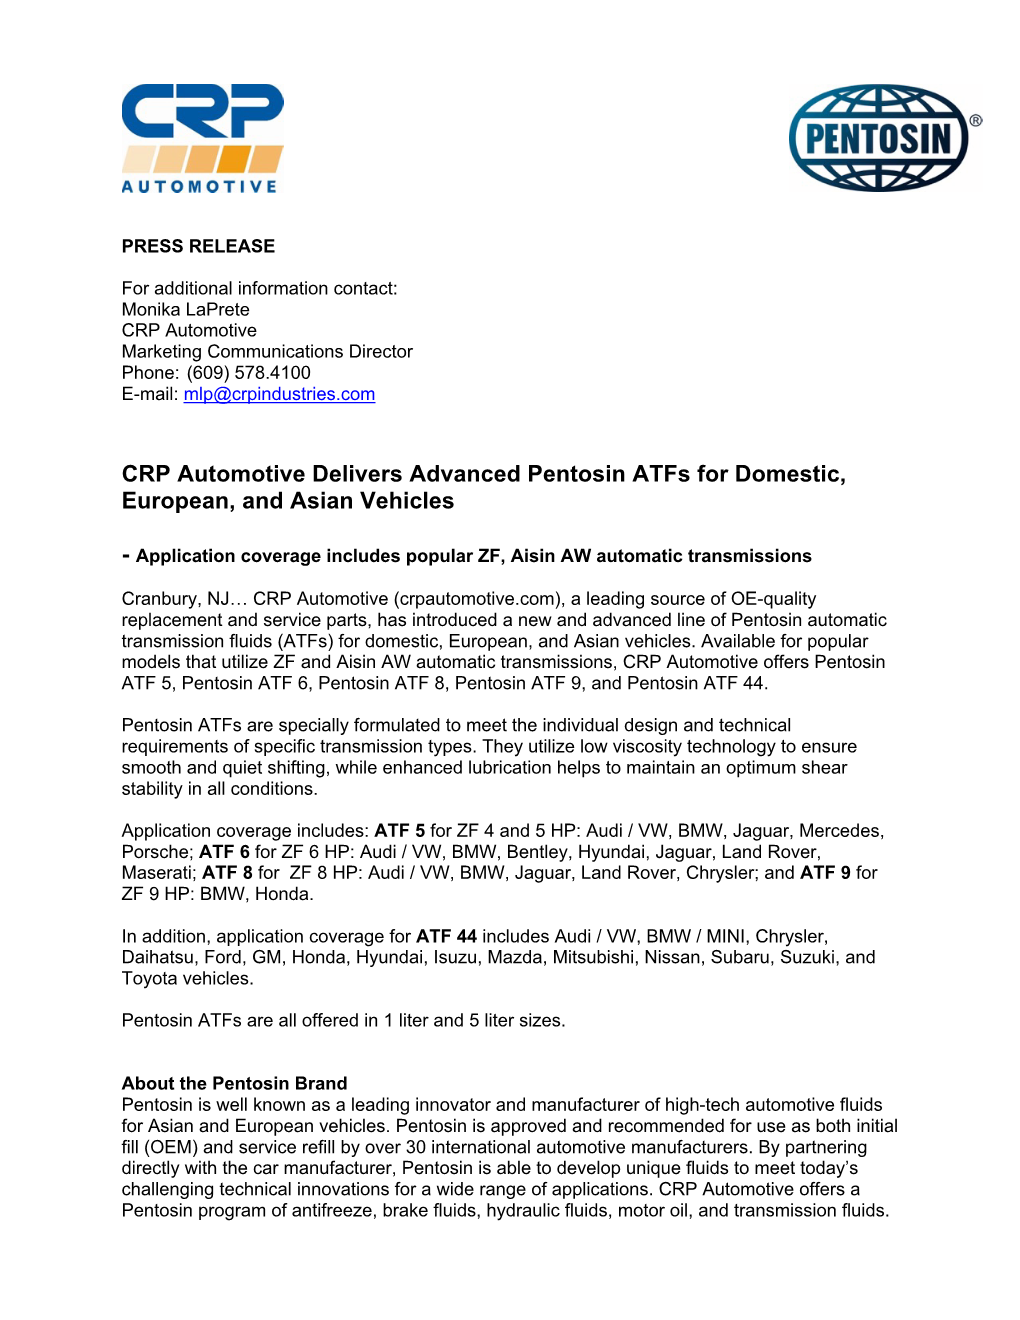 CRP Automotive Delivers Advanced Pentosin Atfs for Domestic, European, and Asian Vehicles